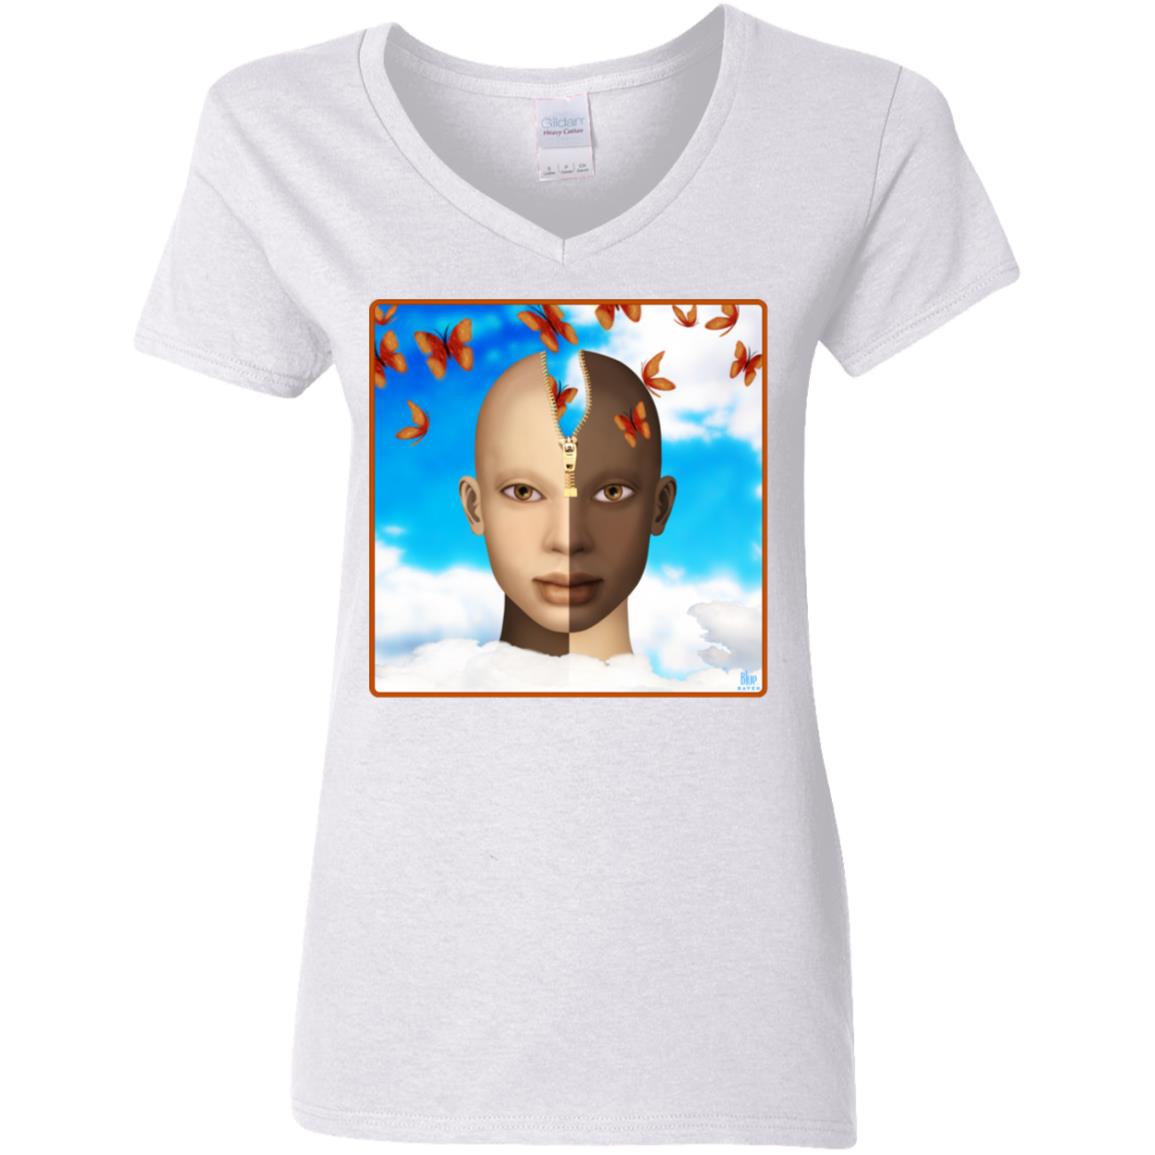 Color Of Our Thoughts - Women's V-Neck T Shirt